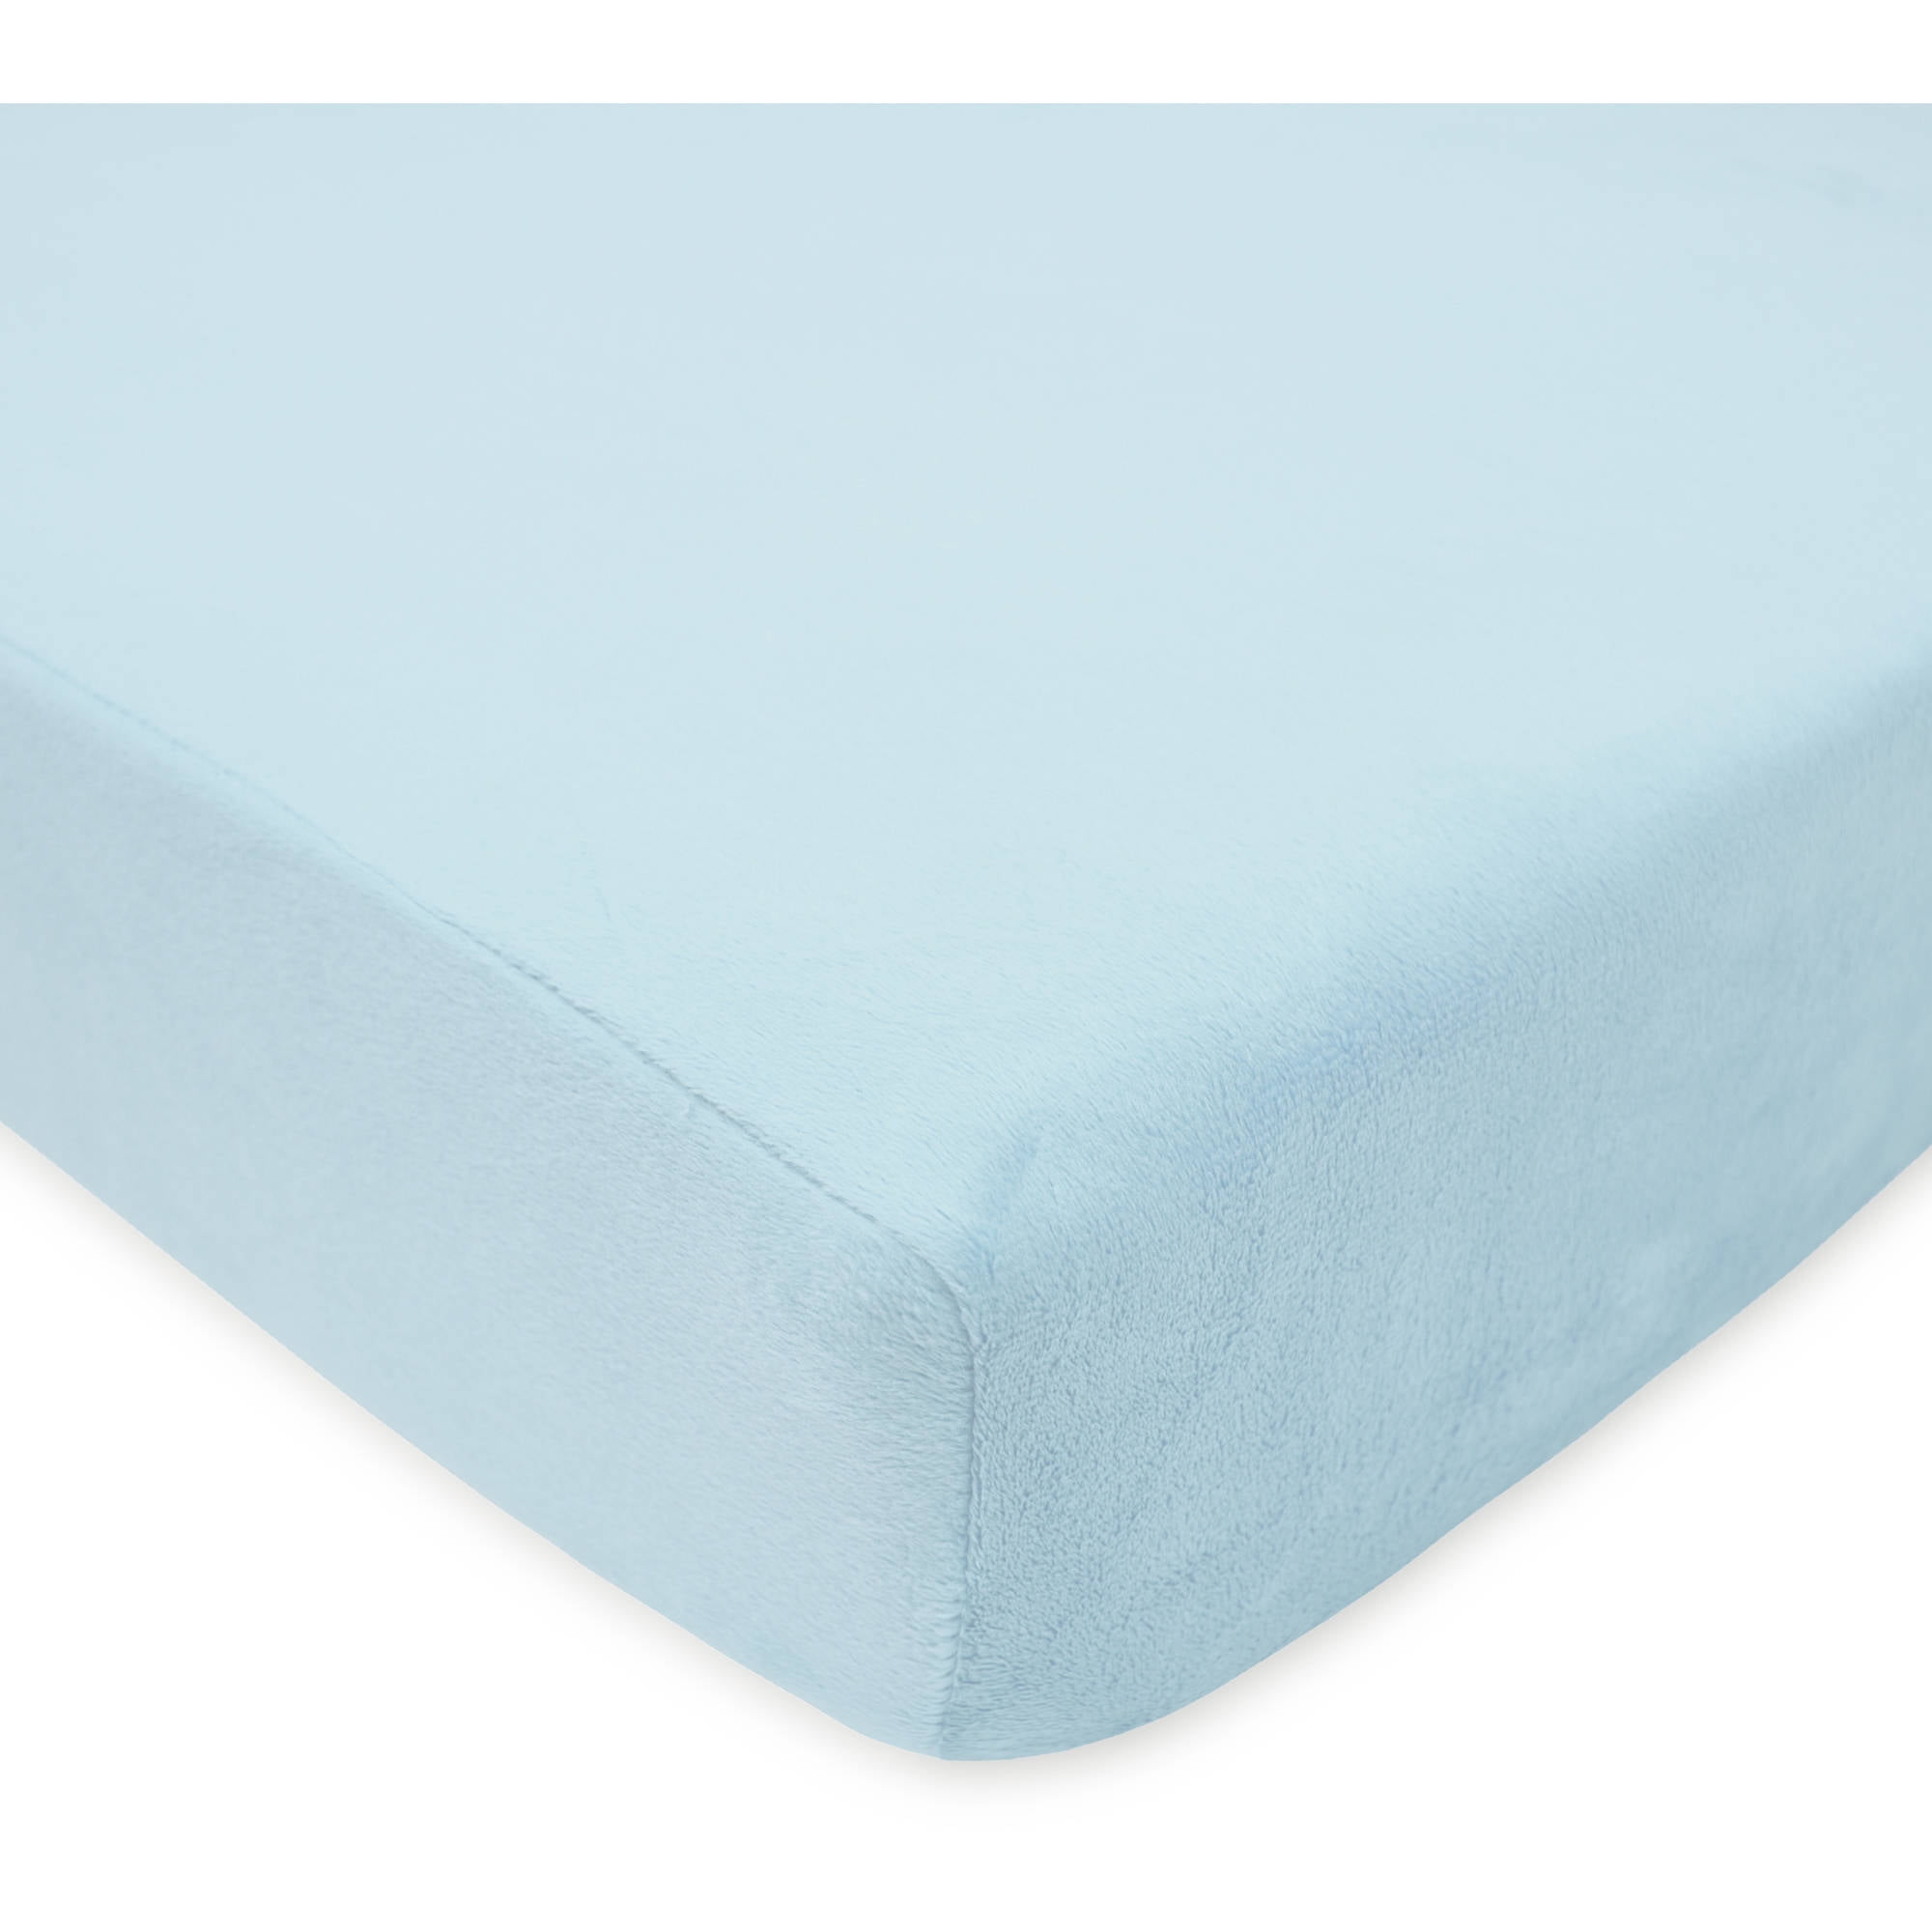 American Baby Company Crib and Toddler Bundle, Mattress Pad Cover,Fitted Sheet Thermal Blanket Blue